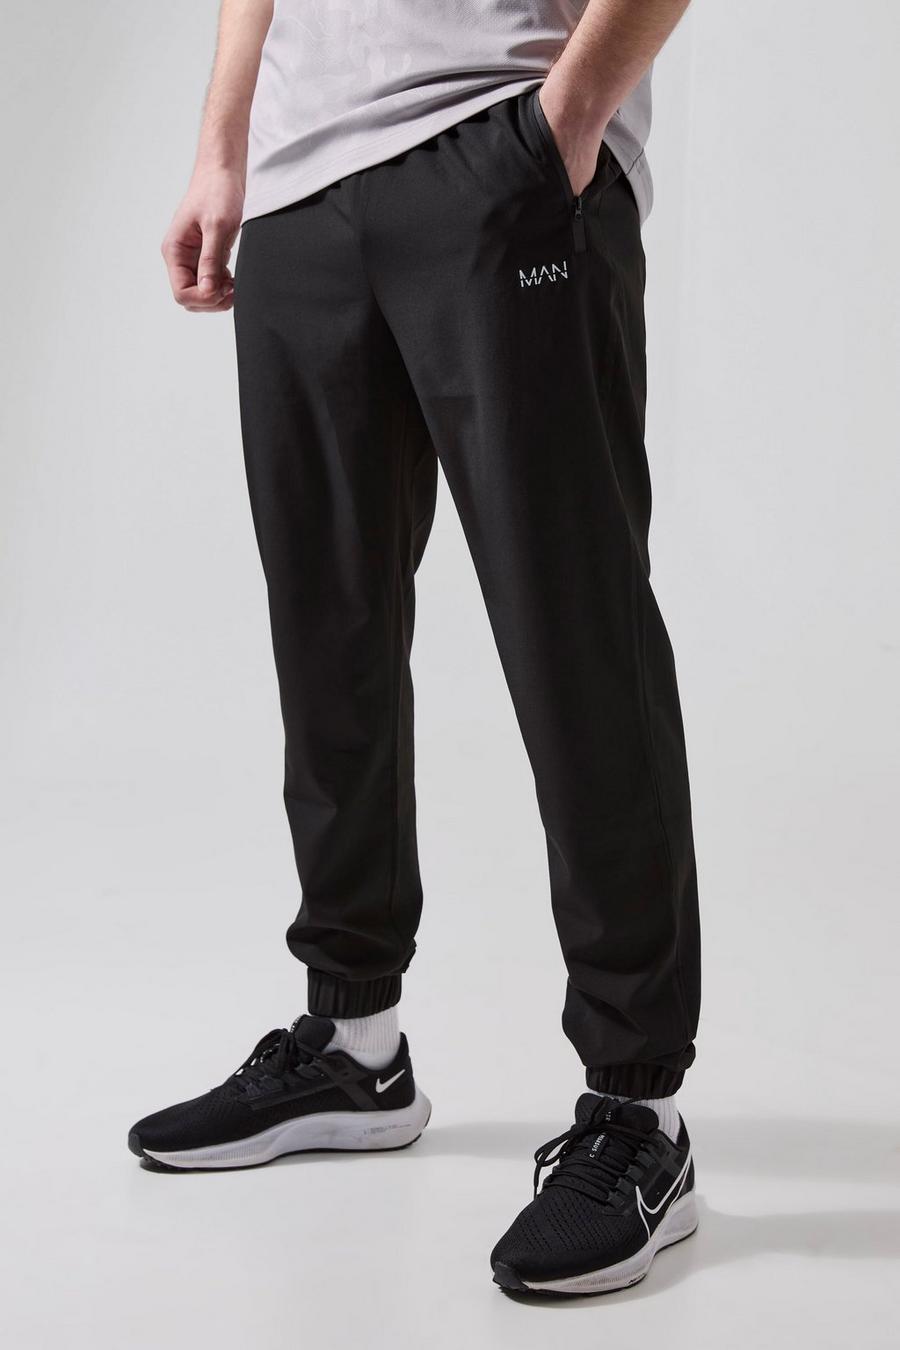 Black Tall Man Active Gym Tapered Sweatpant image number 1